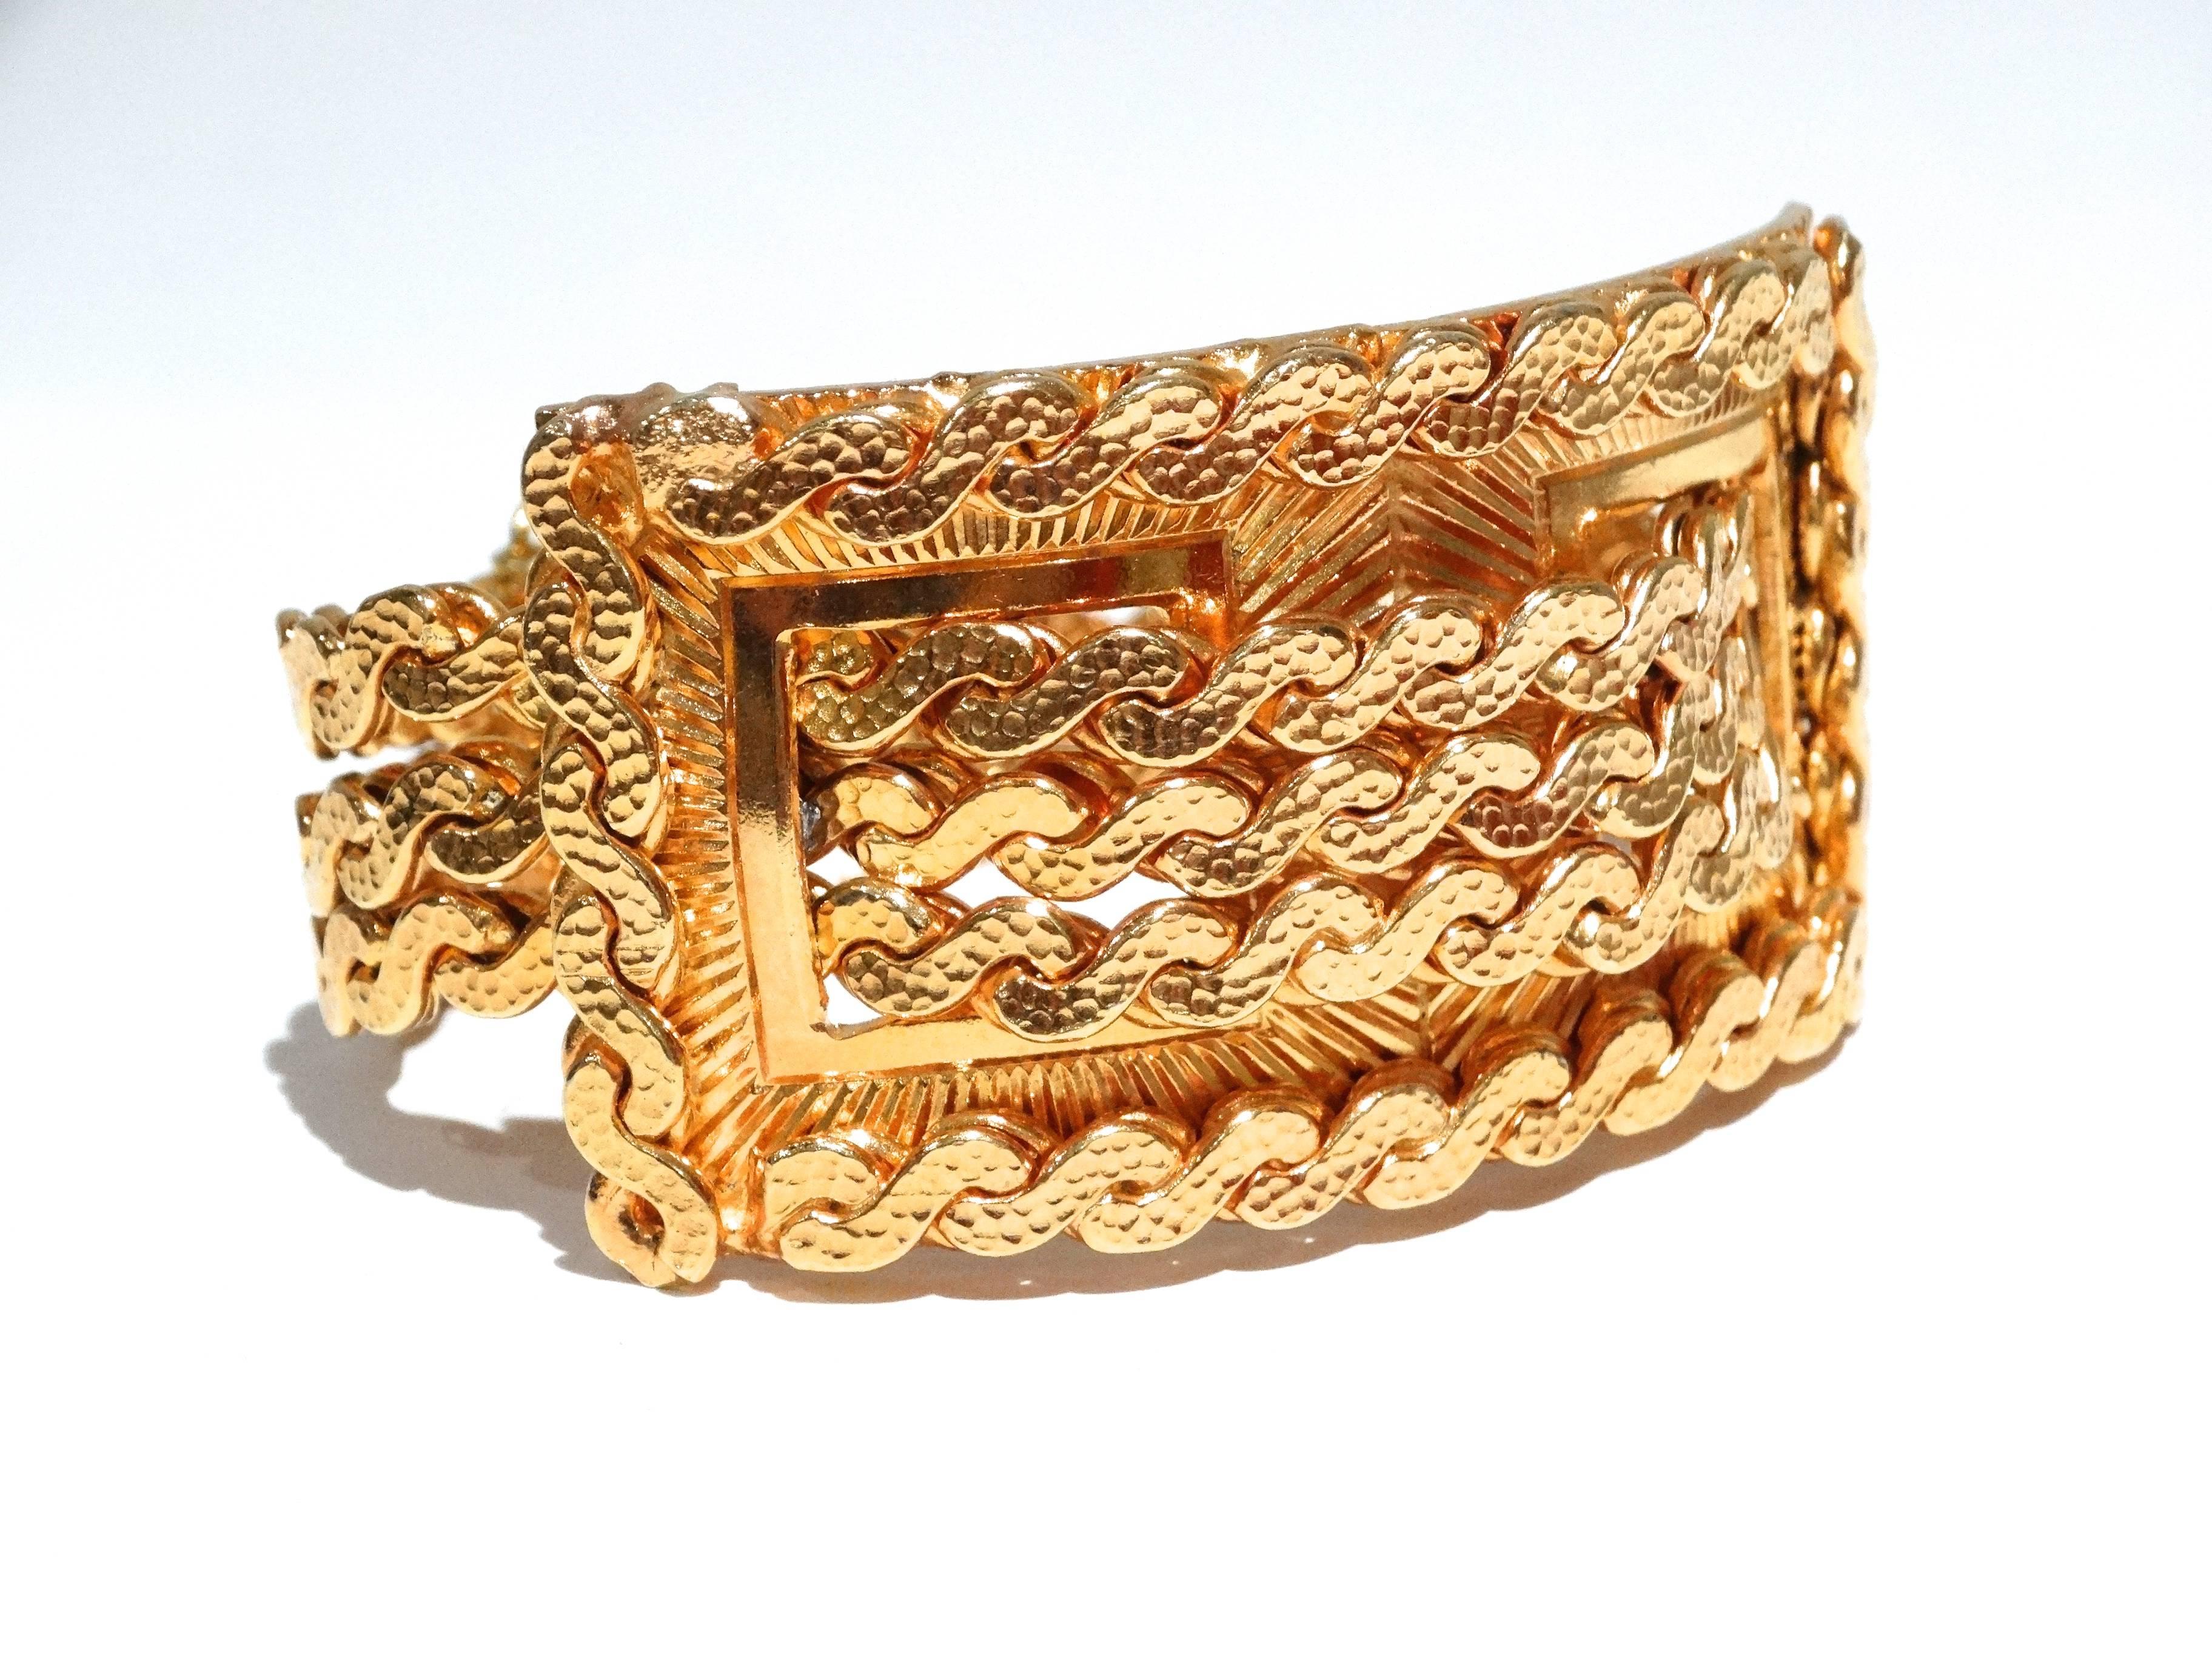 Stunning and glam 1970's signed designer William de Lillo rope plate bracelet. Plated in gold and heavy in weight. Condition is excellent. It is 7″ in length and .65″ wide, the plate section is 3″ long by about 1.5″ wide.

William de Lillo was a